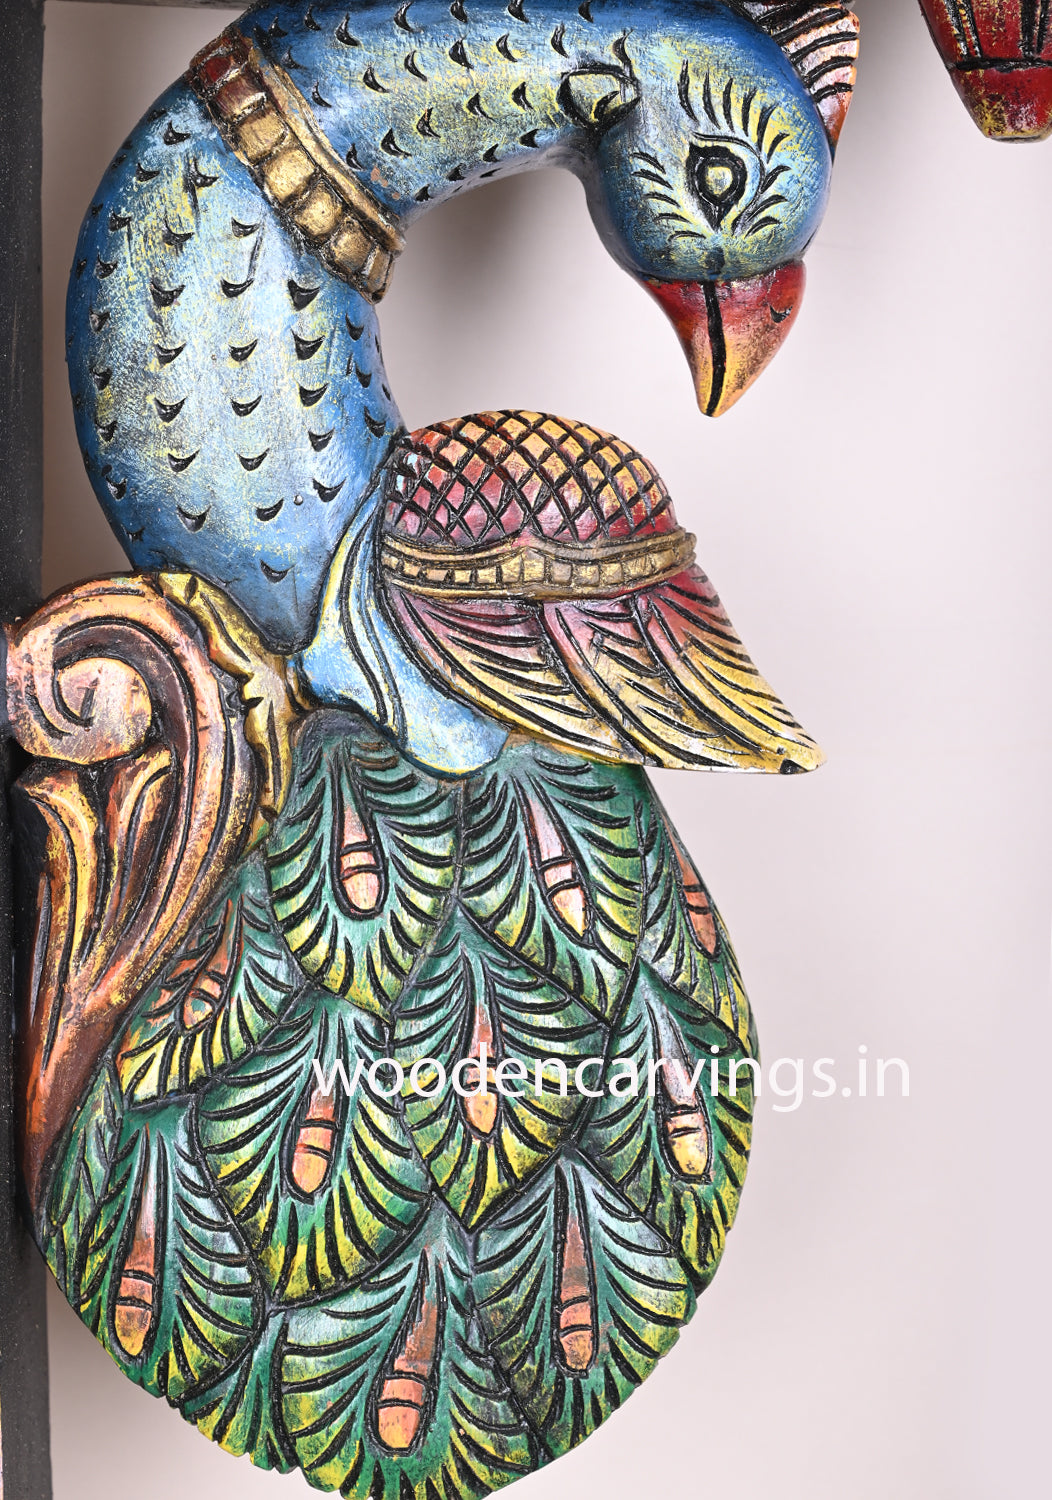 Having Beautiful Feathers Peacock Standing on Tree Wooden Handmade Entrance Decor Wall Mount Sculpture 18"